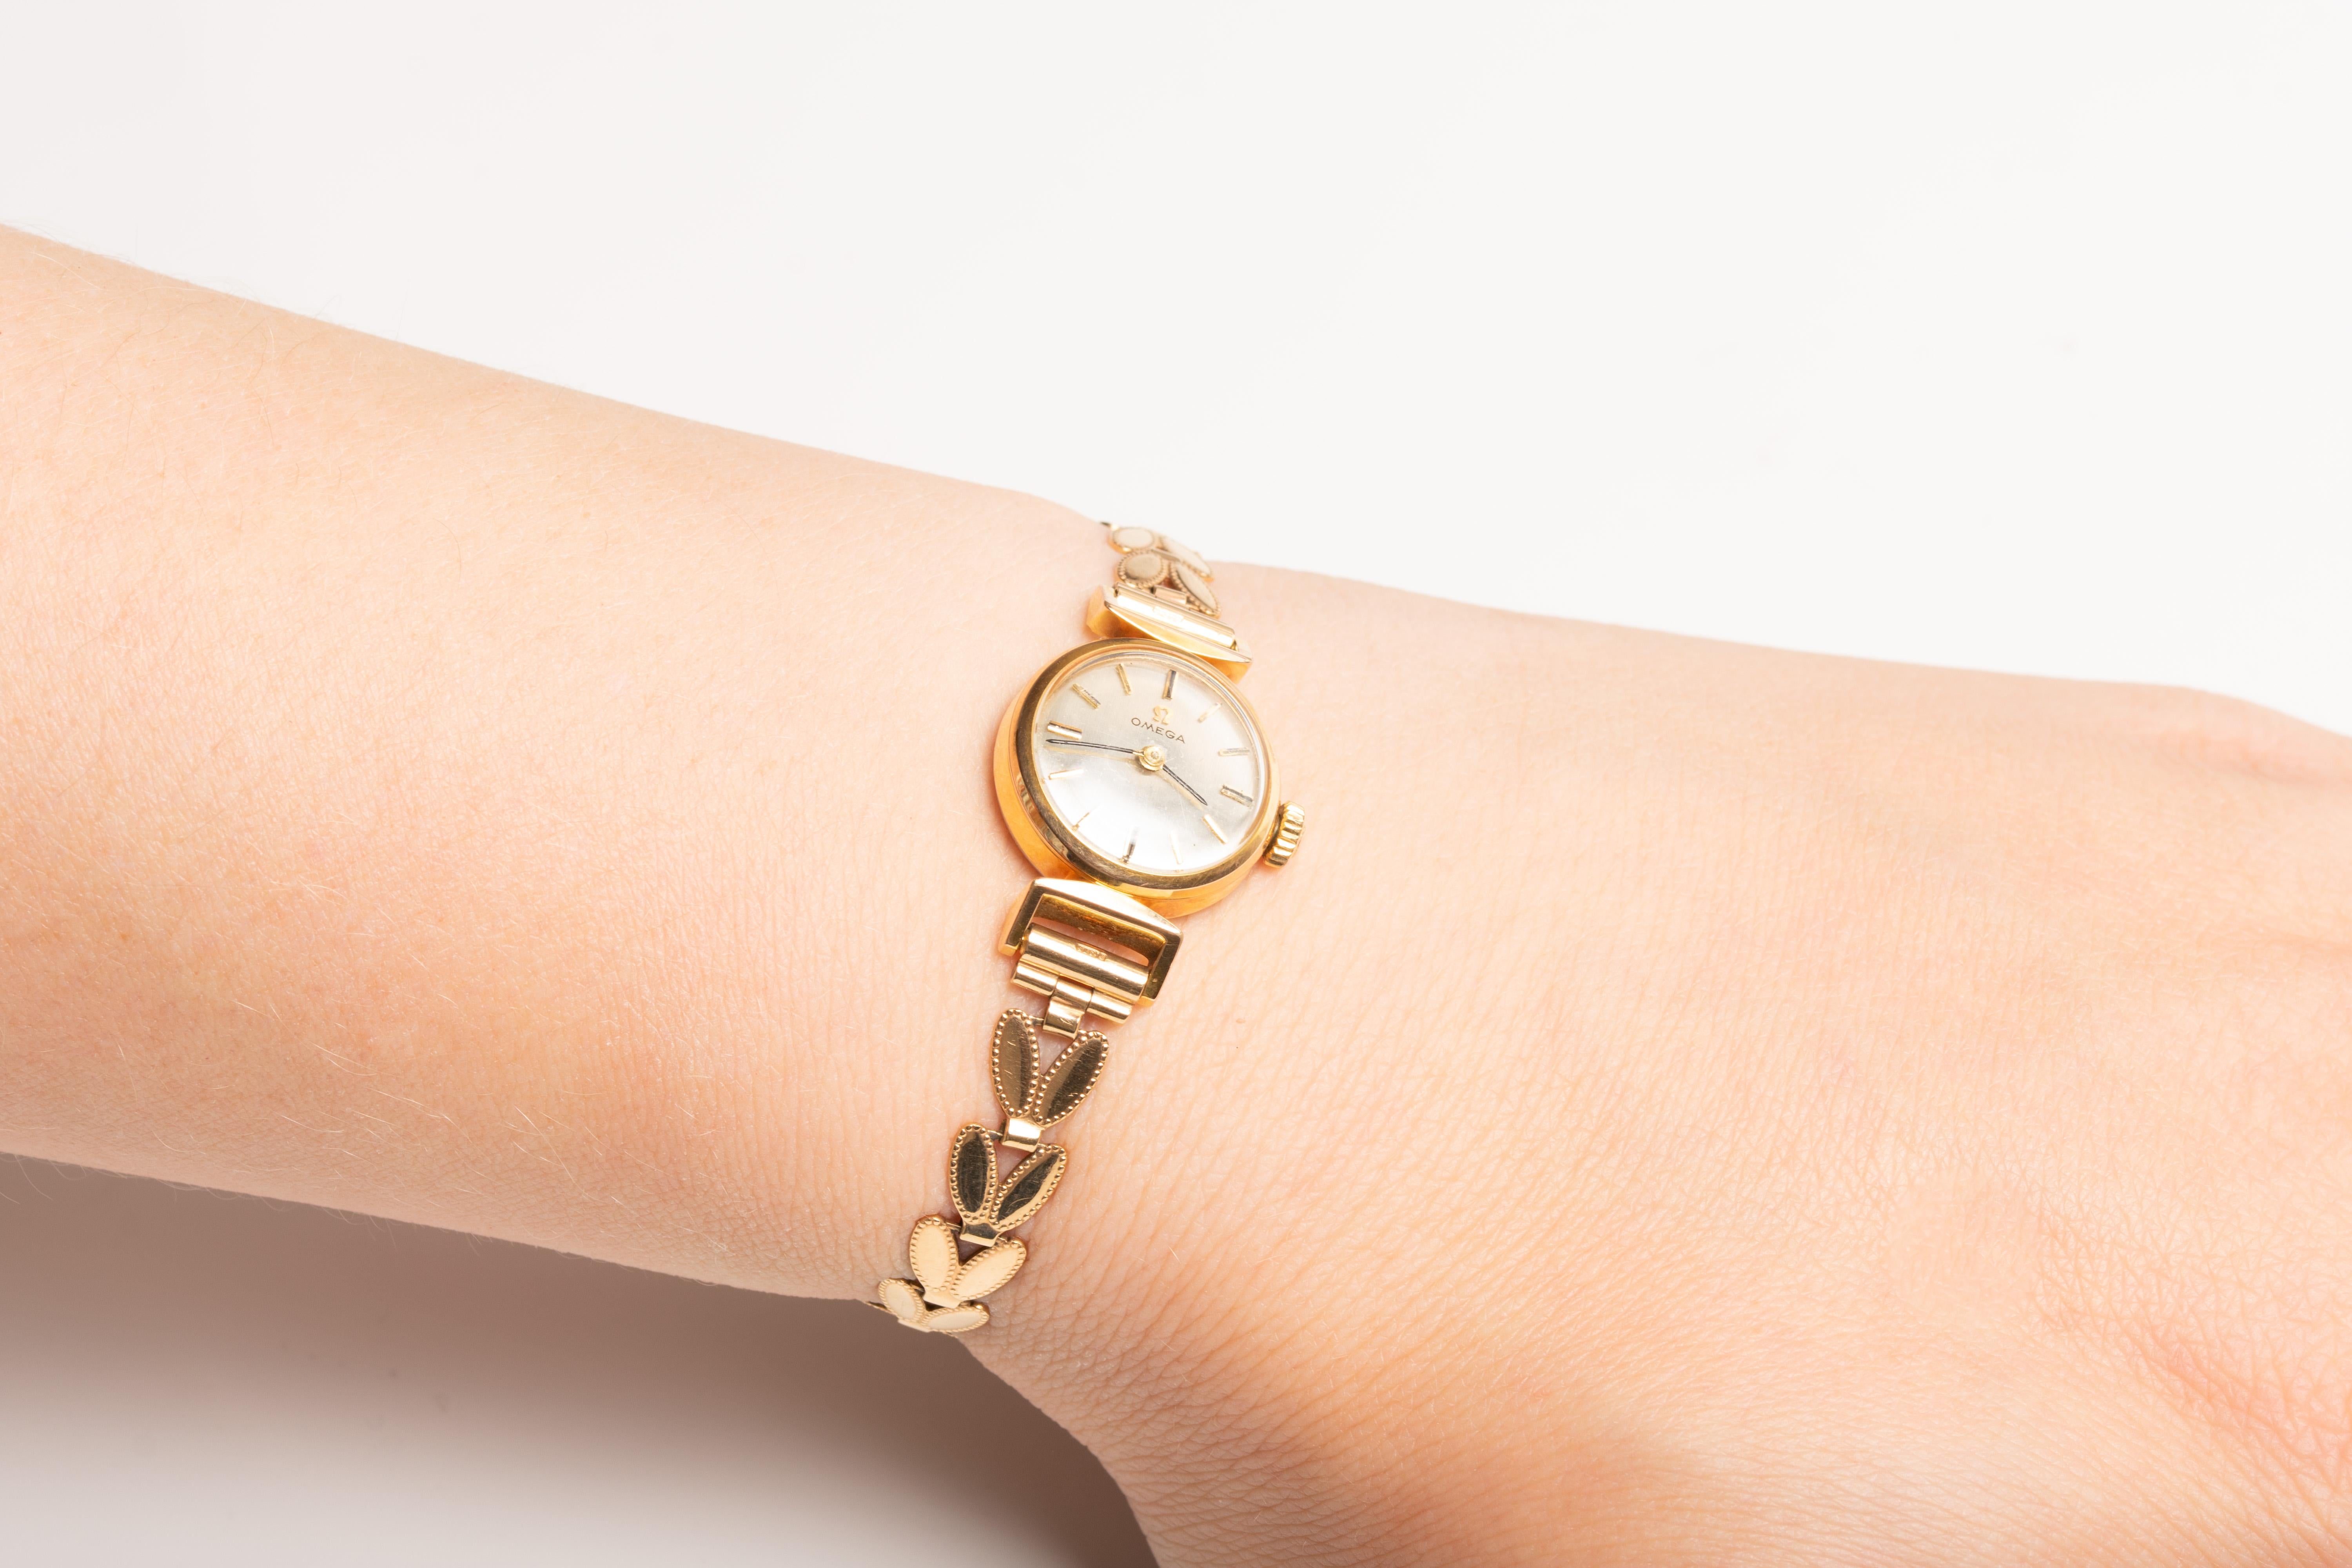 An elegant and classic 9ct Gold Omega Ladies Wristwatch with an original and stunning gold bracelet and accompanying gold watch face. Fully hallmarked for 9ct gold on two of the links and clasp. This stunning timepiece features an elegant 9ct yellow